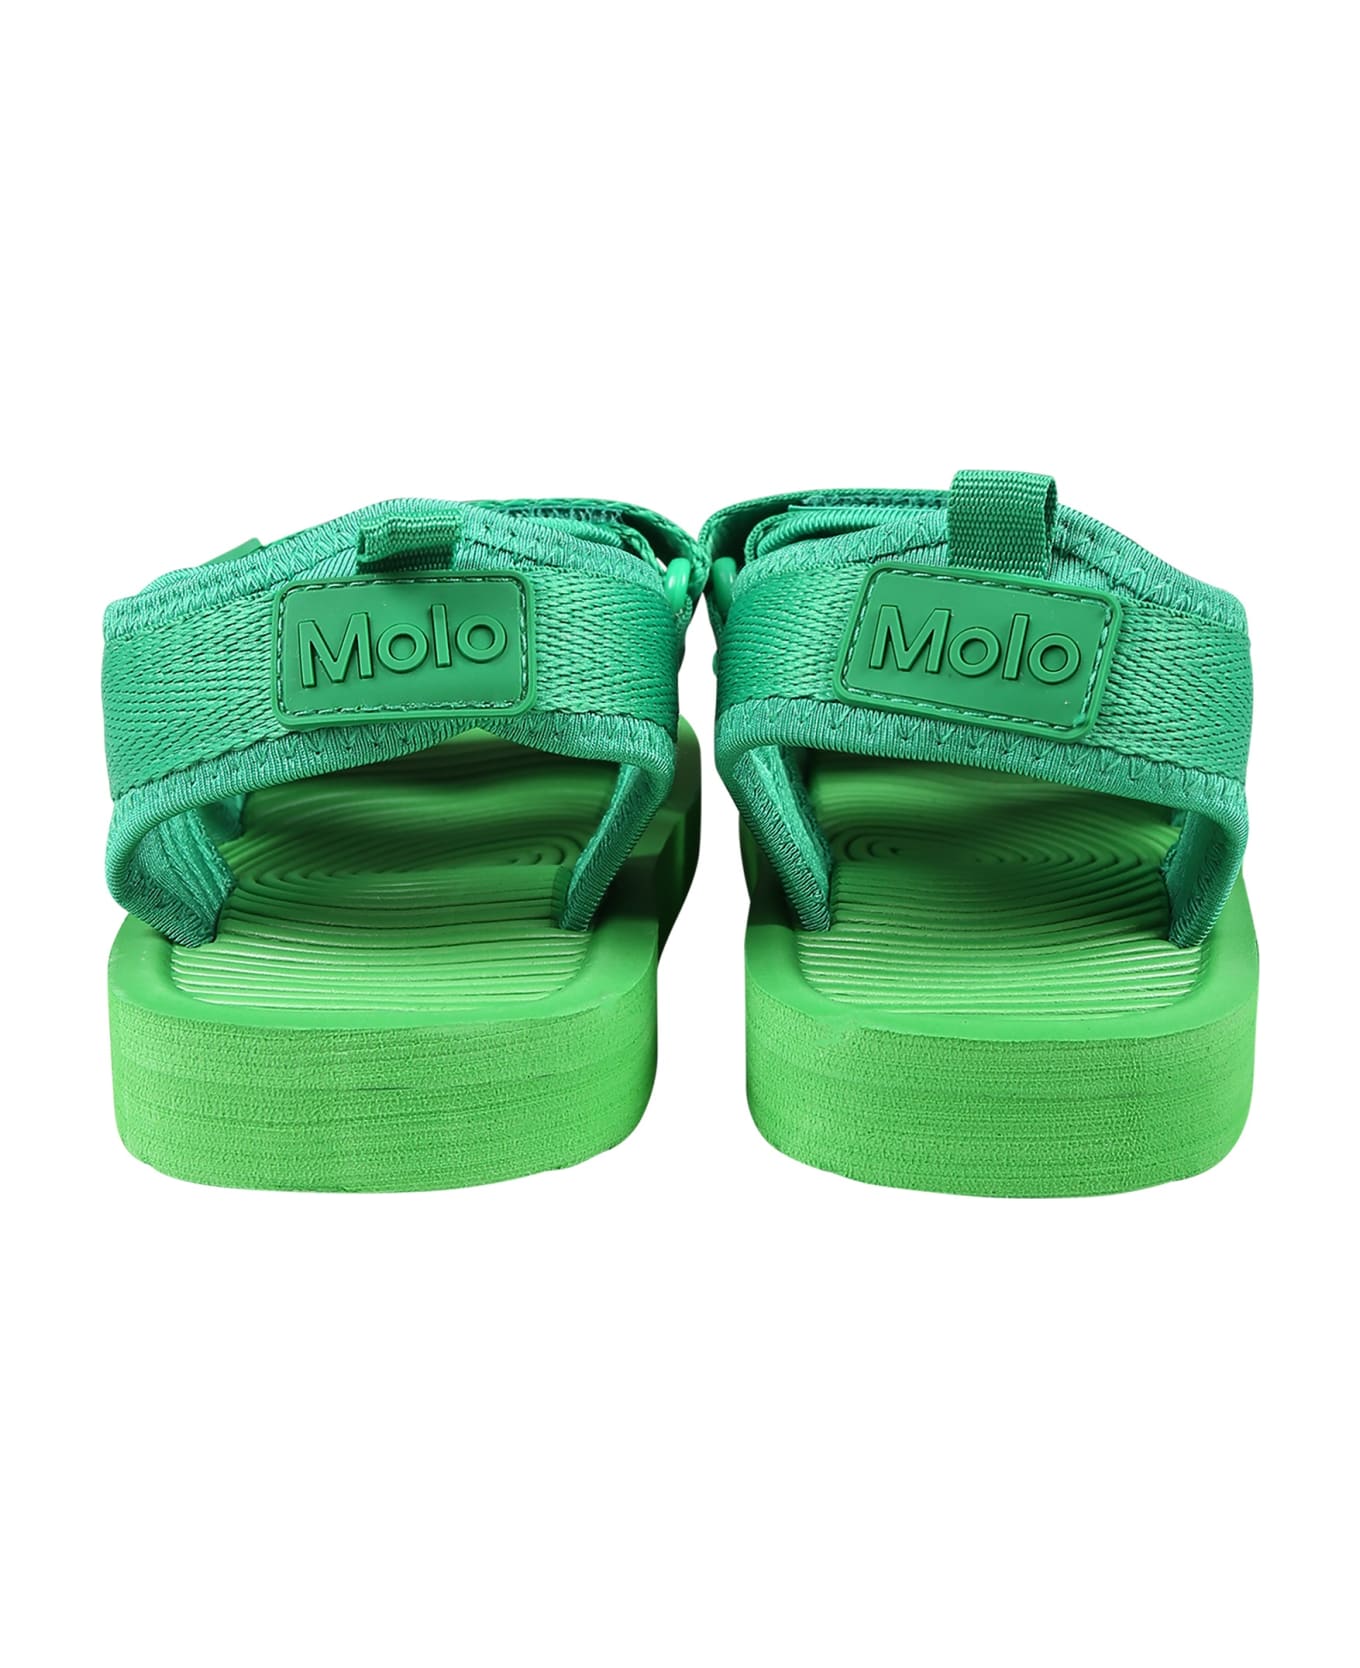 Molo Green Sandals For Kids With Logo - Green